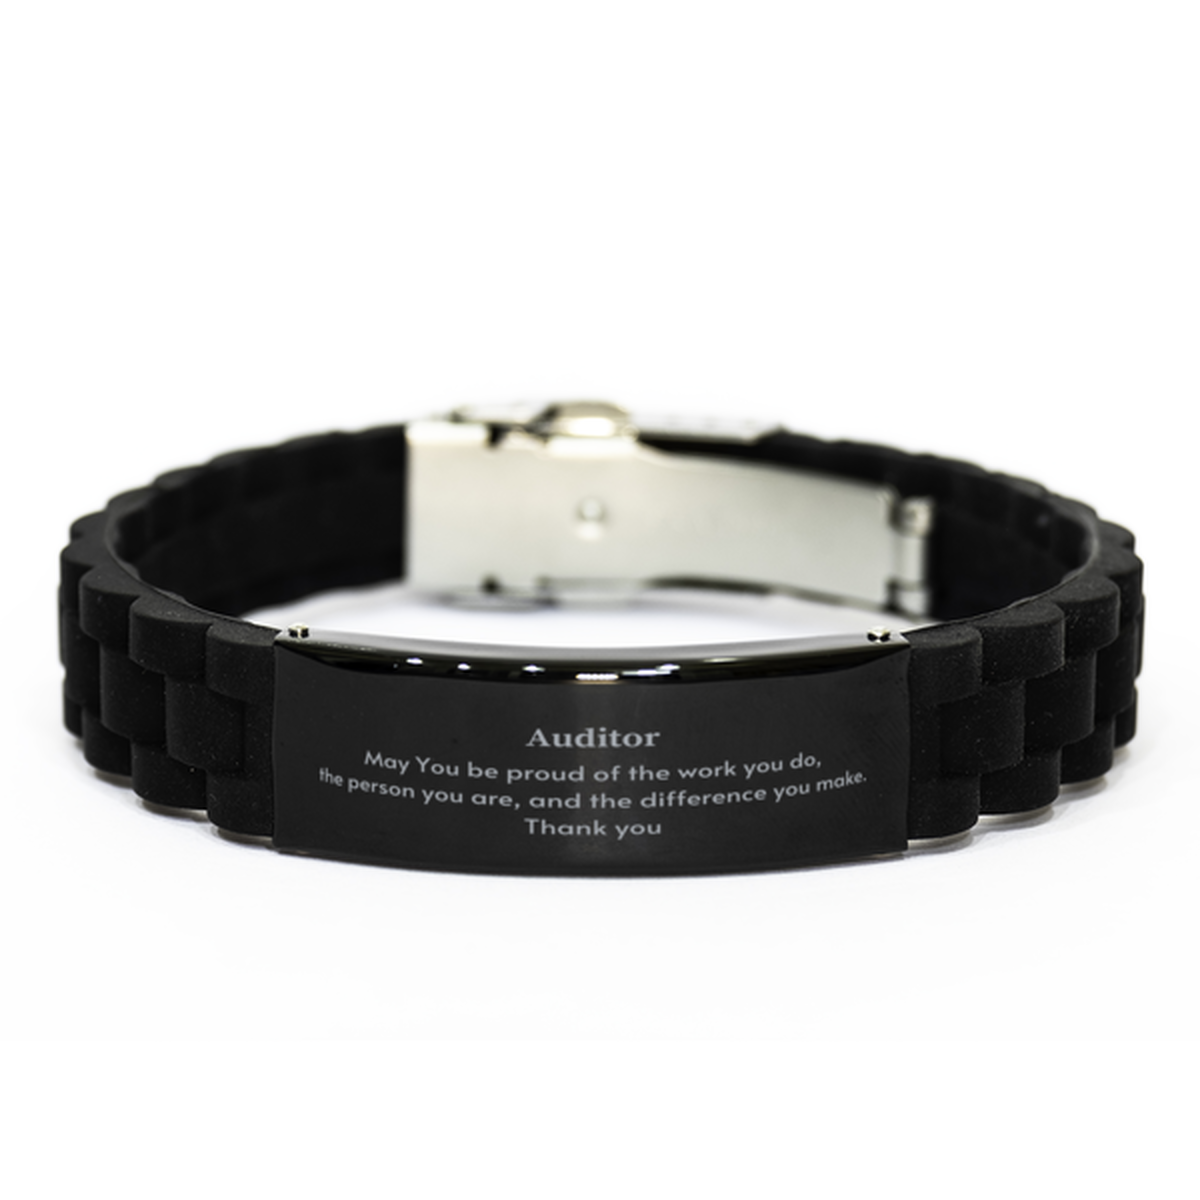 Heartwarming Black Glidelock Clasp Bracelet Retirement Coworkers Gifts for Auditor, Auditor May You be proud of the work you do, the person you are Gifts for Boss Men Women Friends